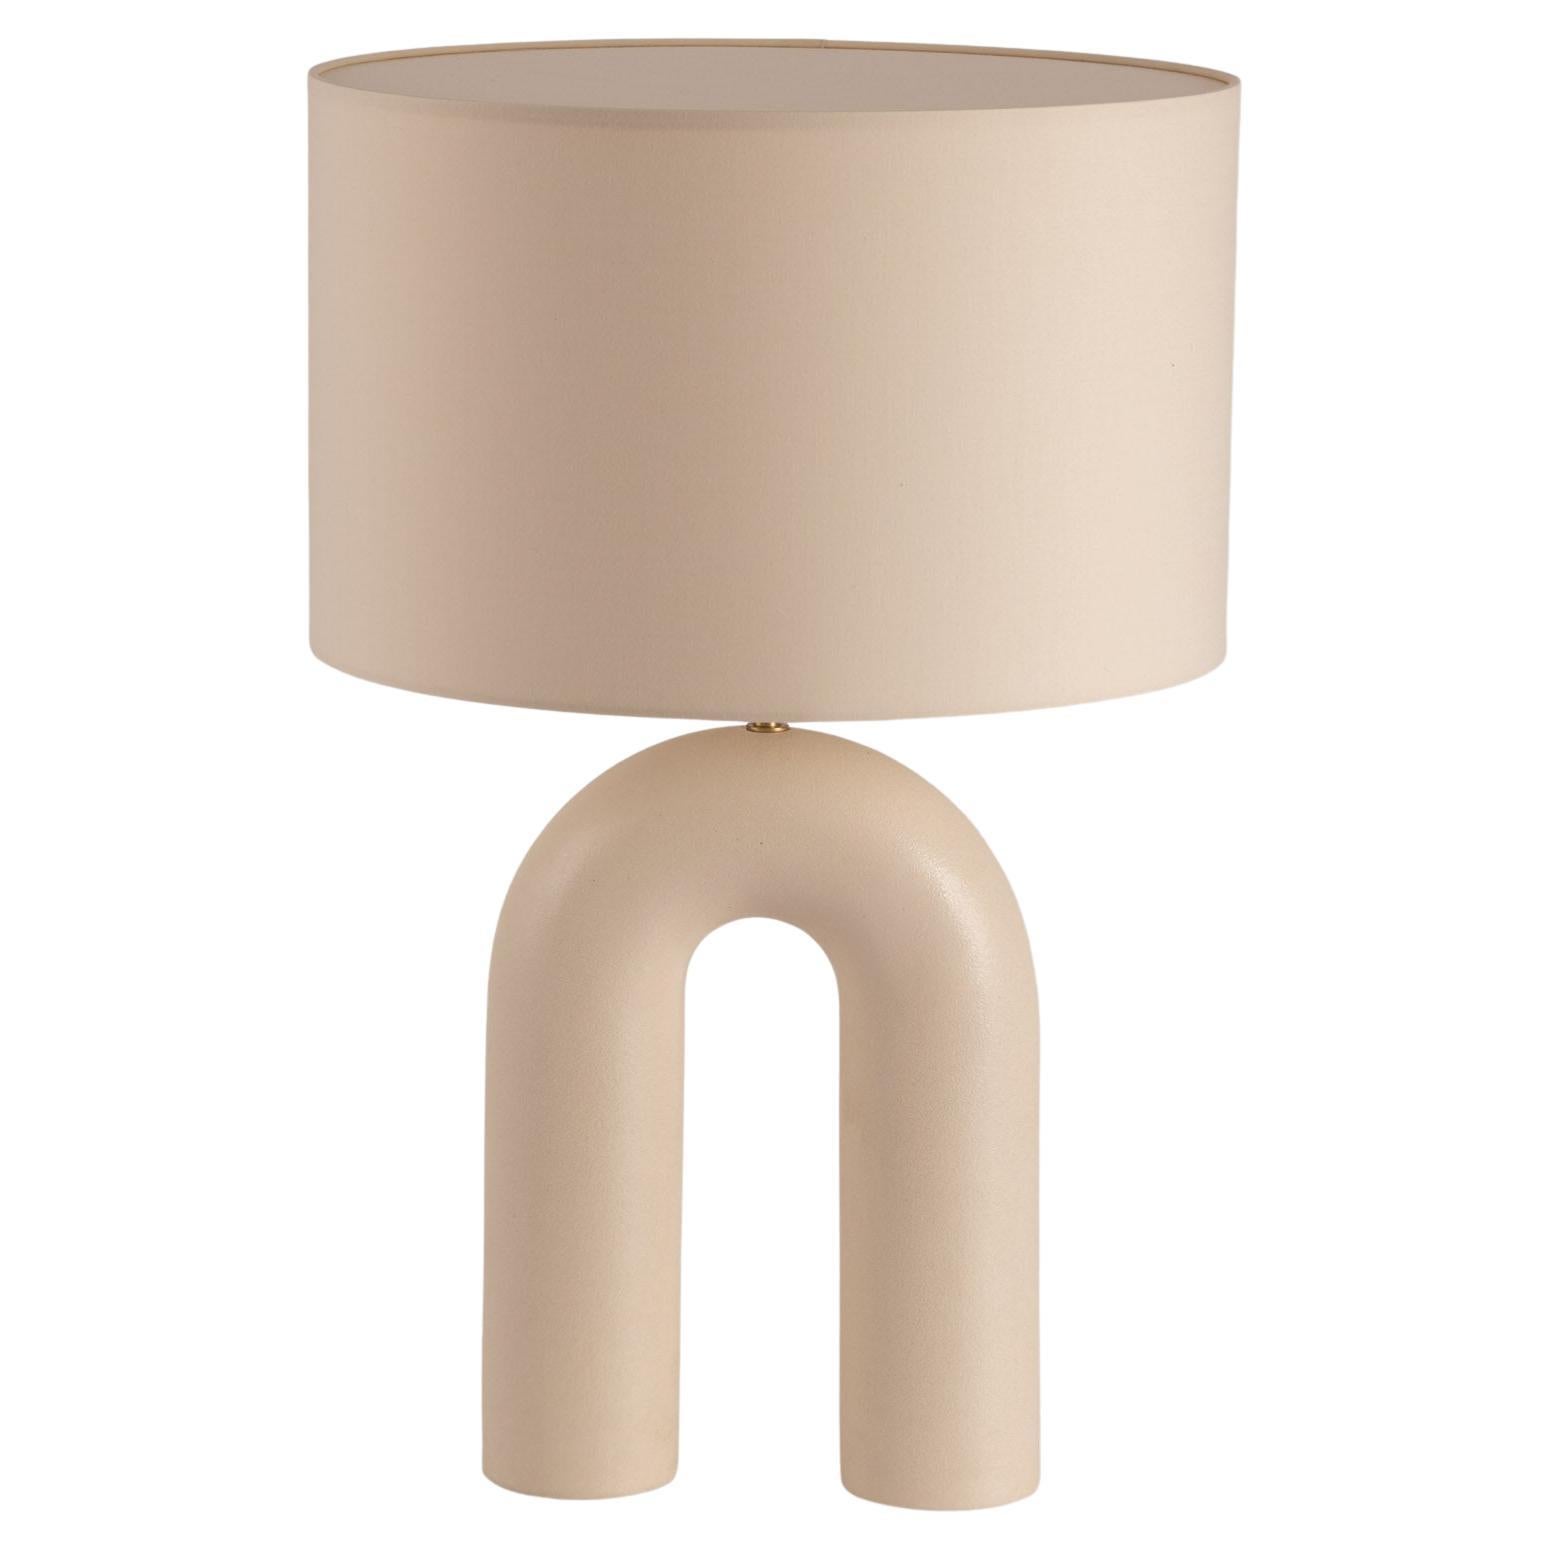 Ecru Ceramic Arko Table Lamp with Beige Lampshade by Simone & Marcel